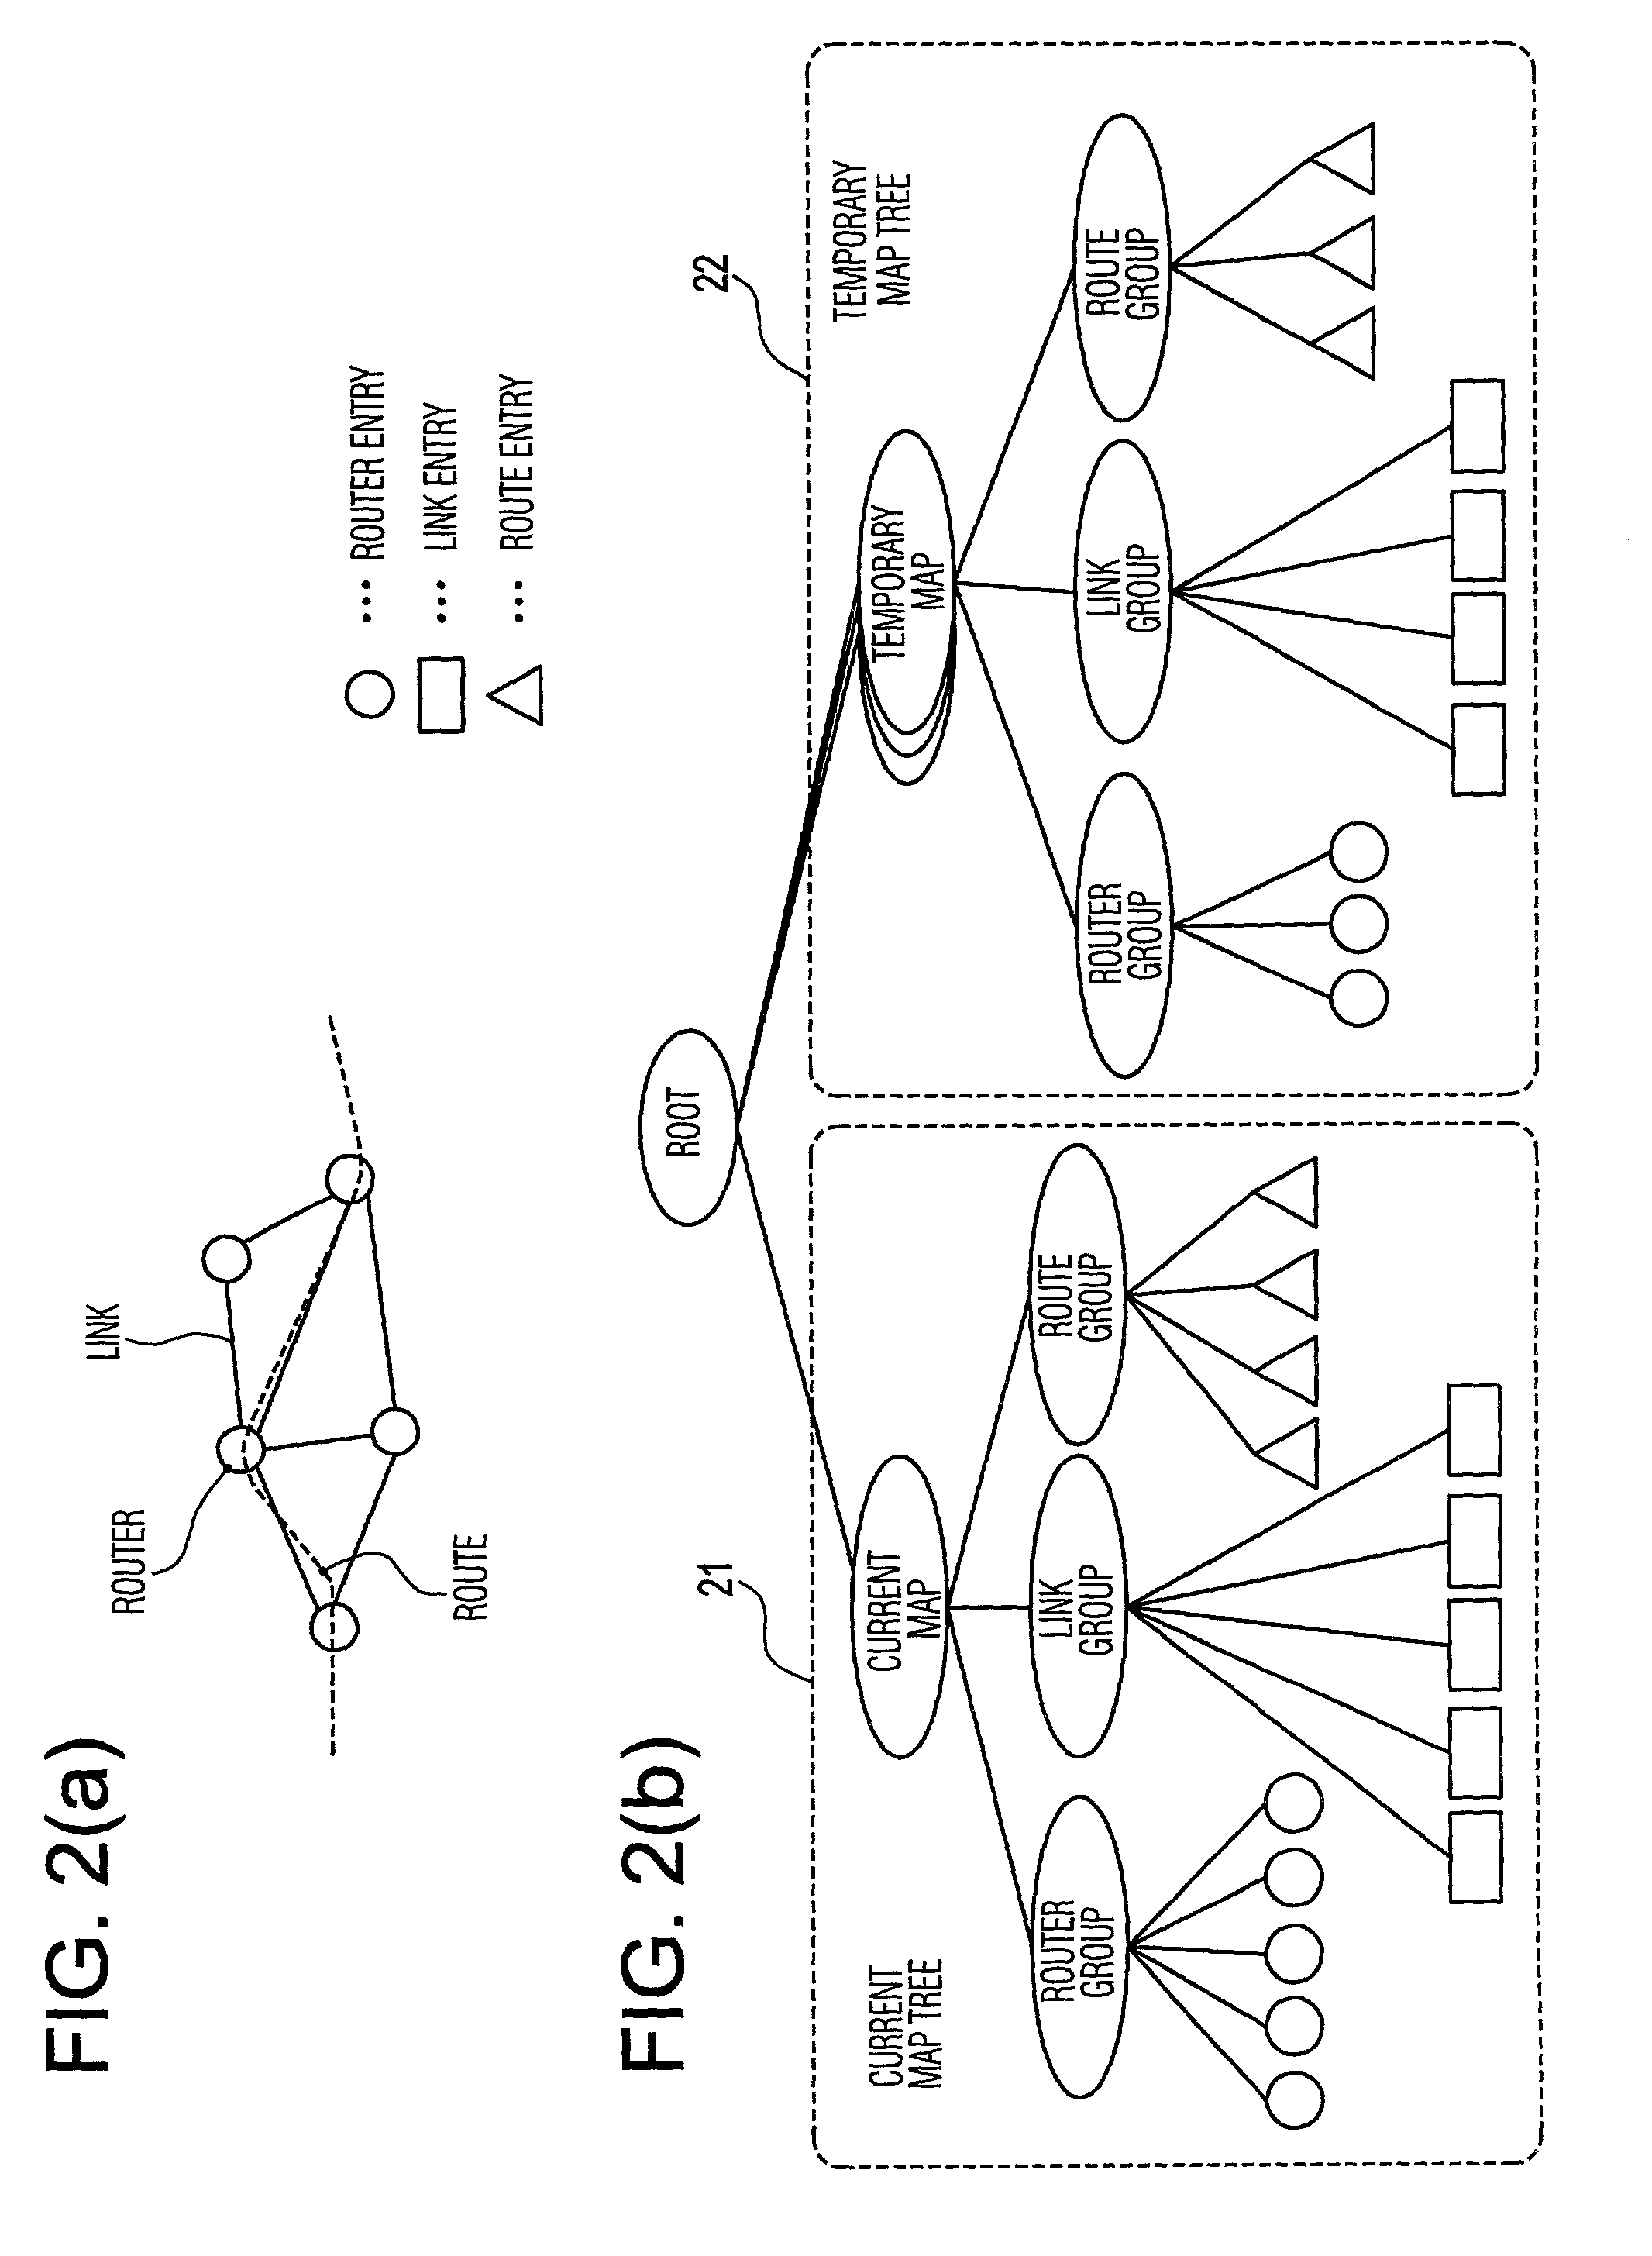 System and method for managing network configuration data, computer program for same